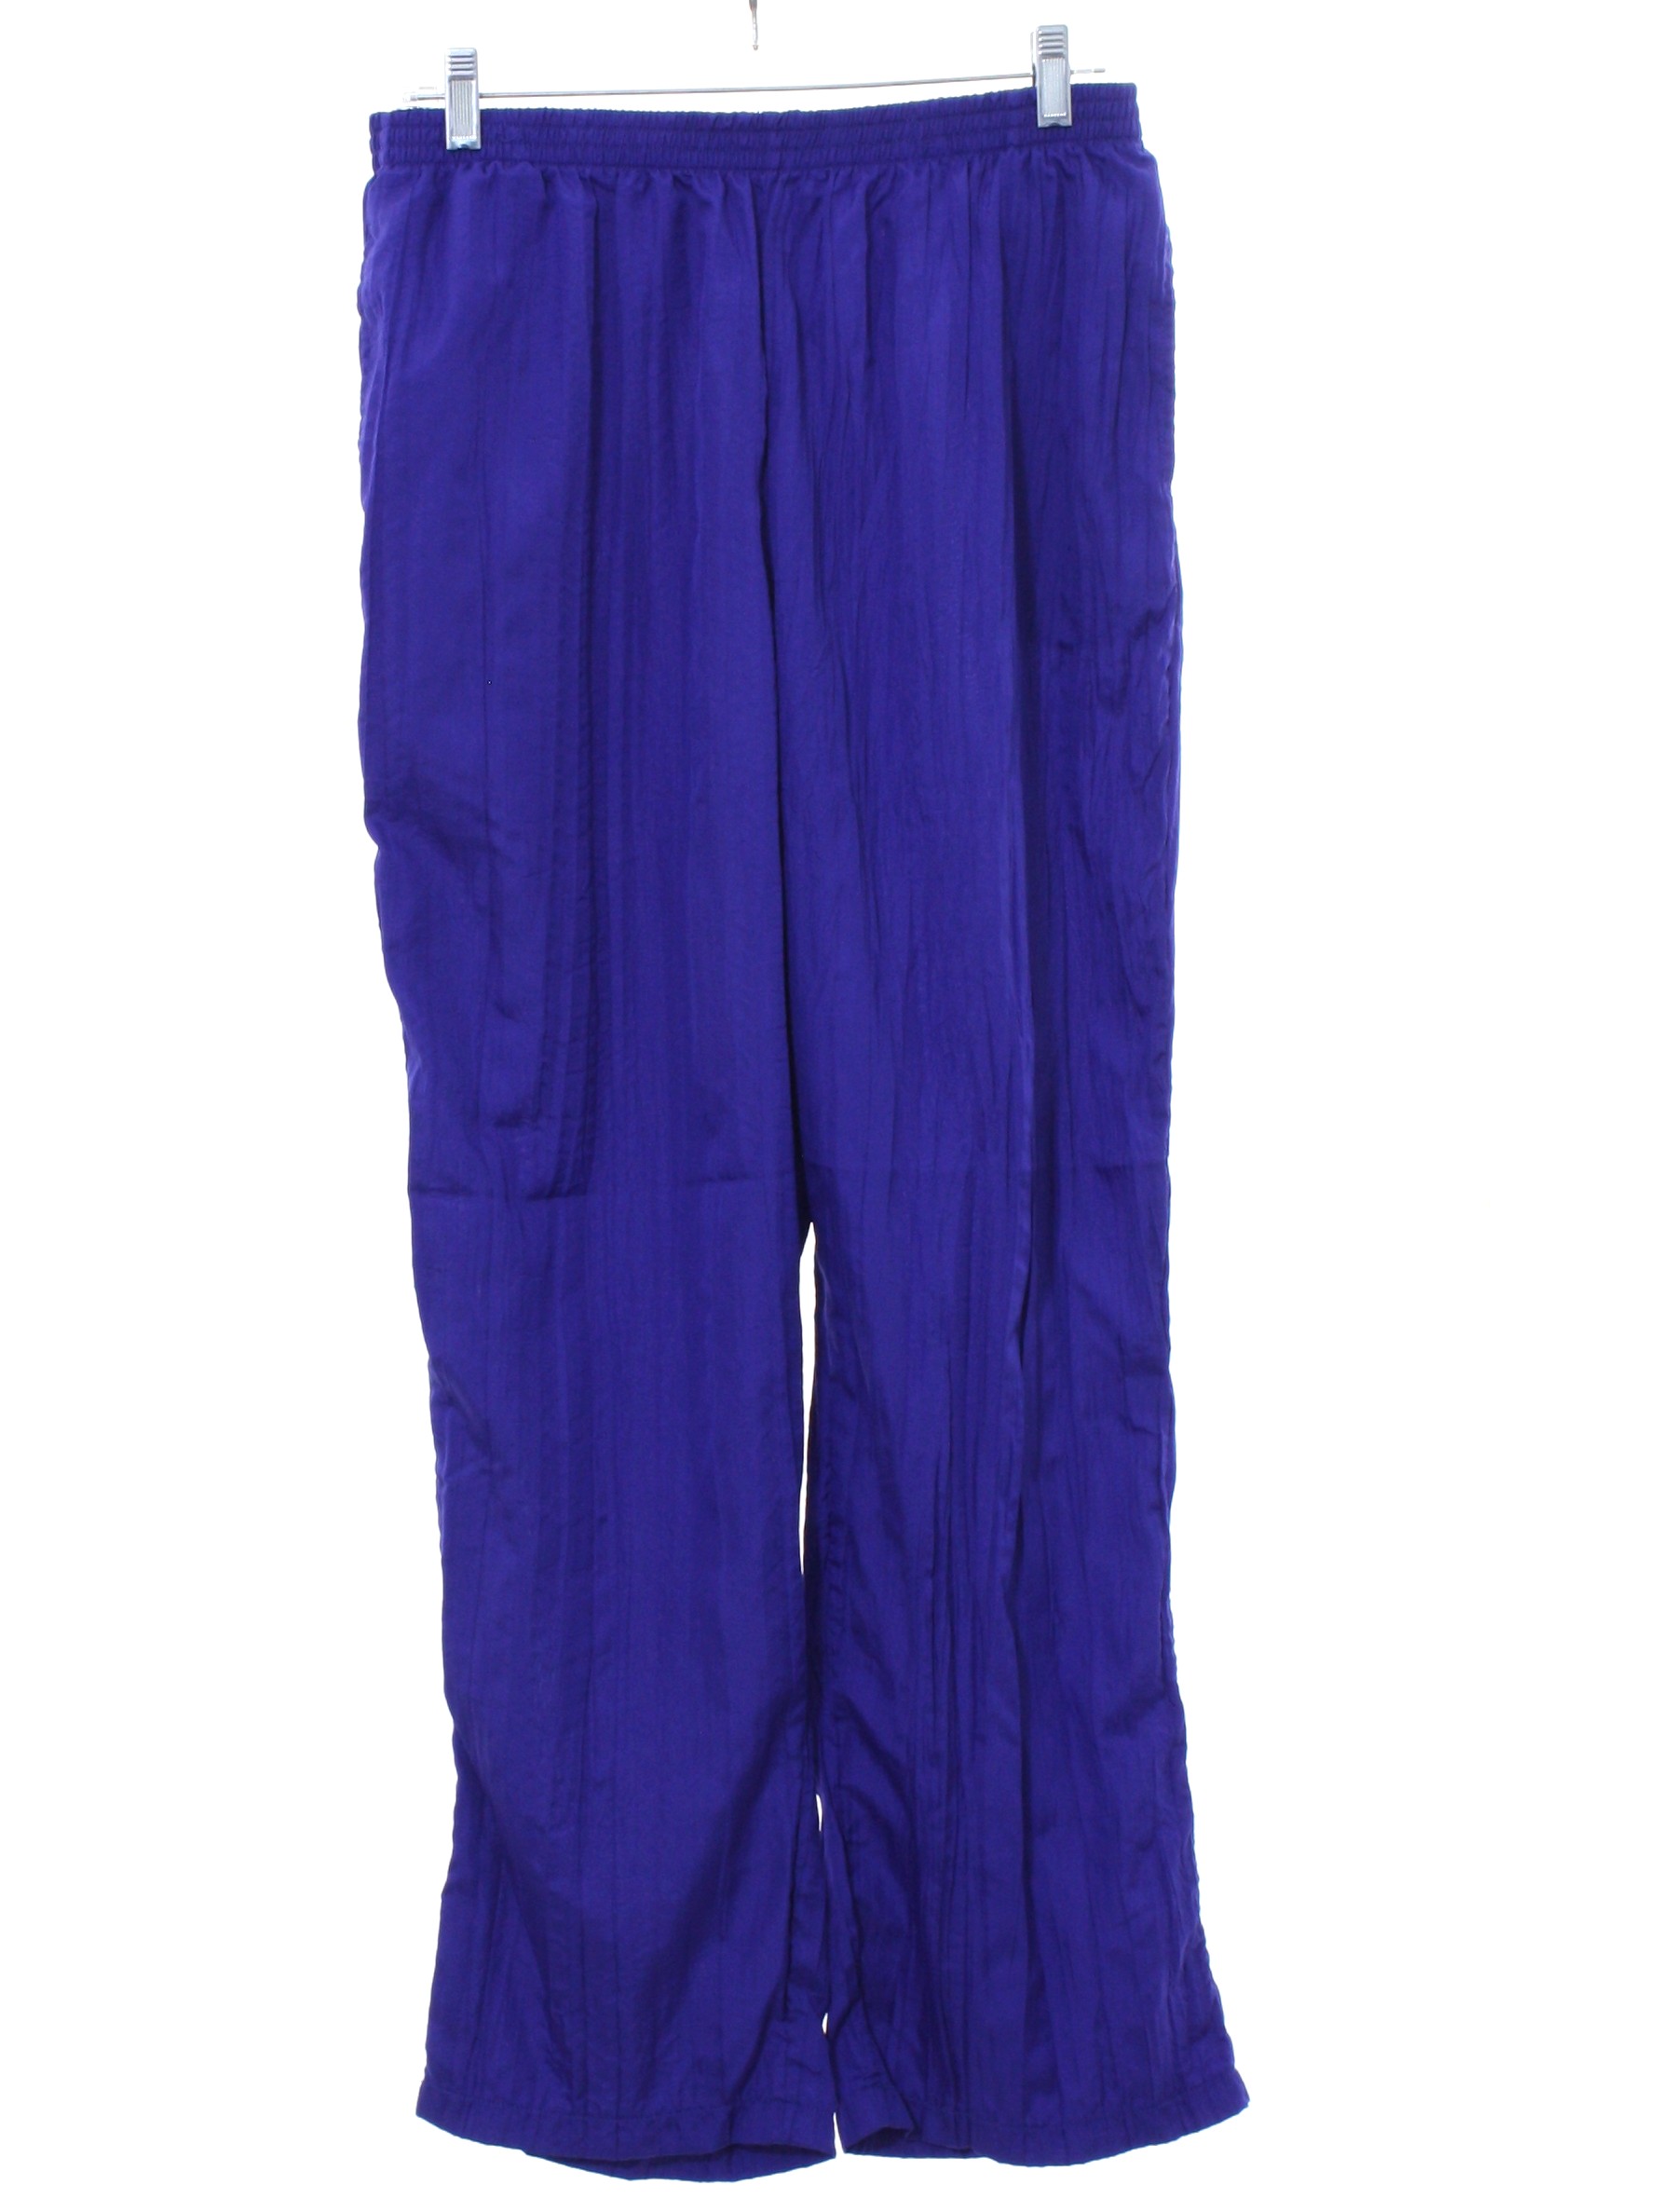 Pants: -No Label- Womens grape colored lightweight crinkly polyester ...